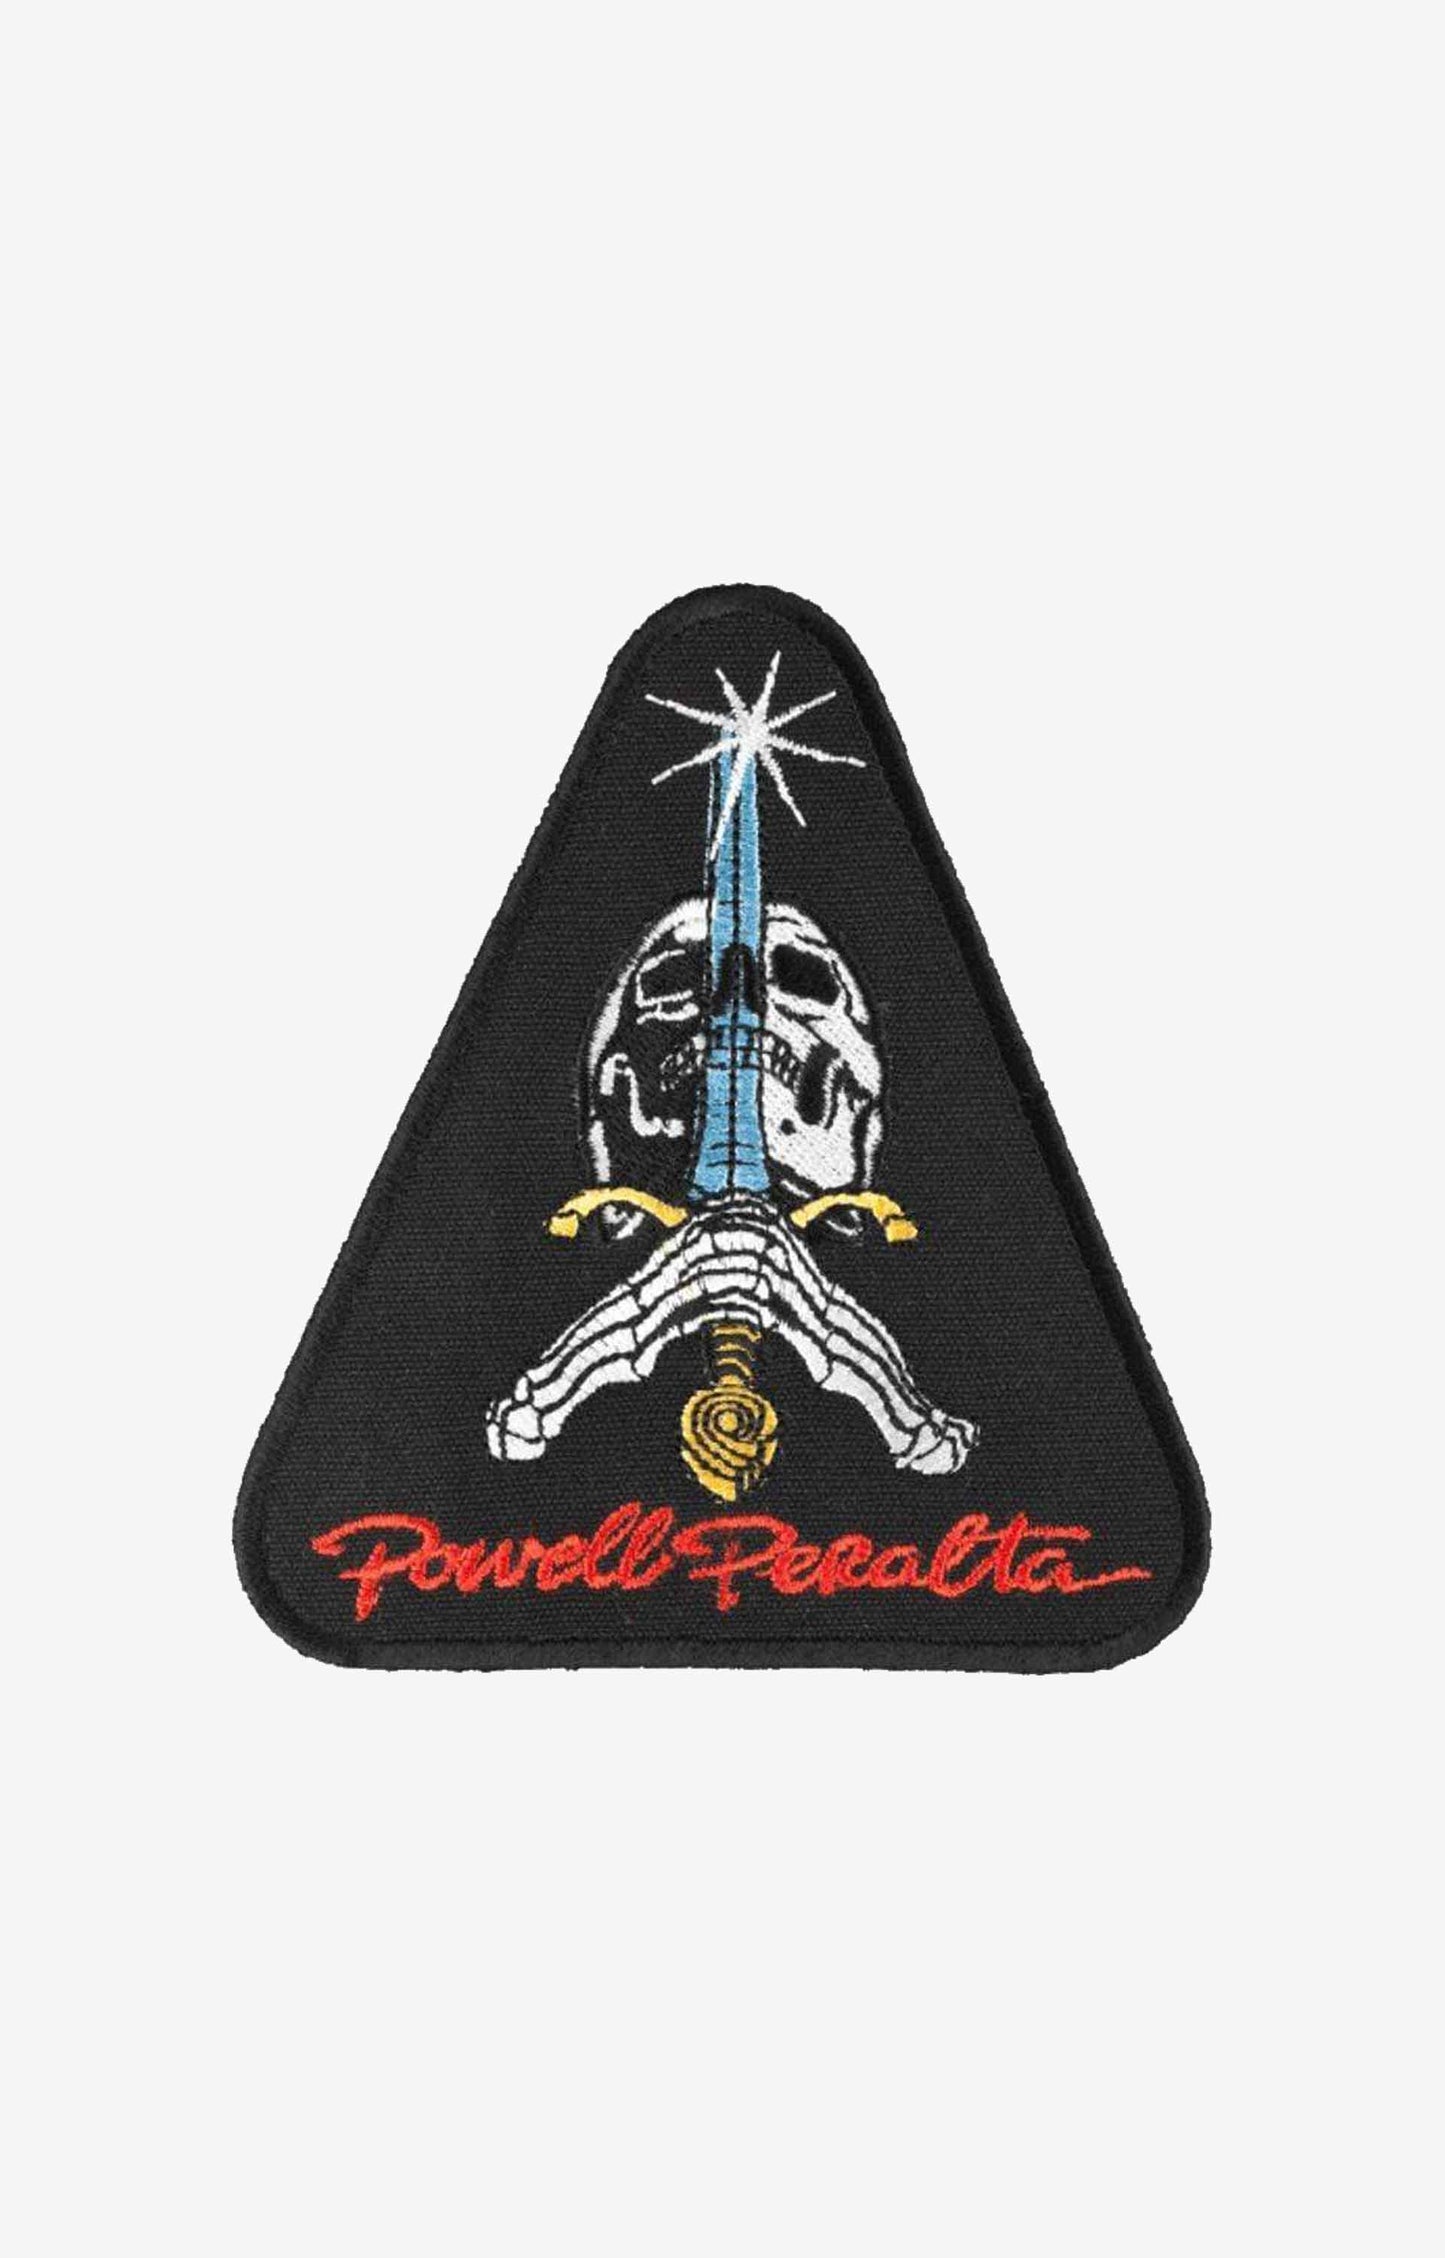 Powell Peralta Patch Skull & Sword Patch, Black